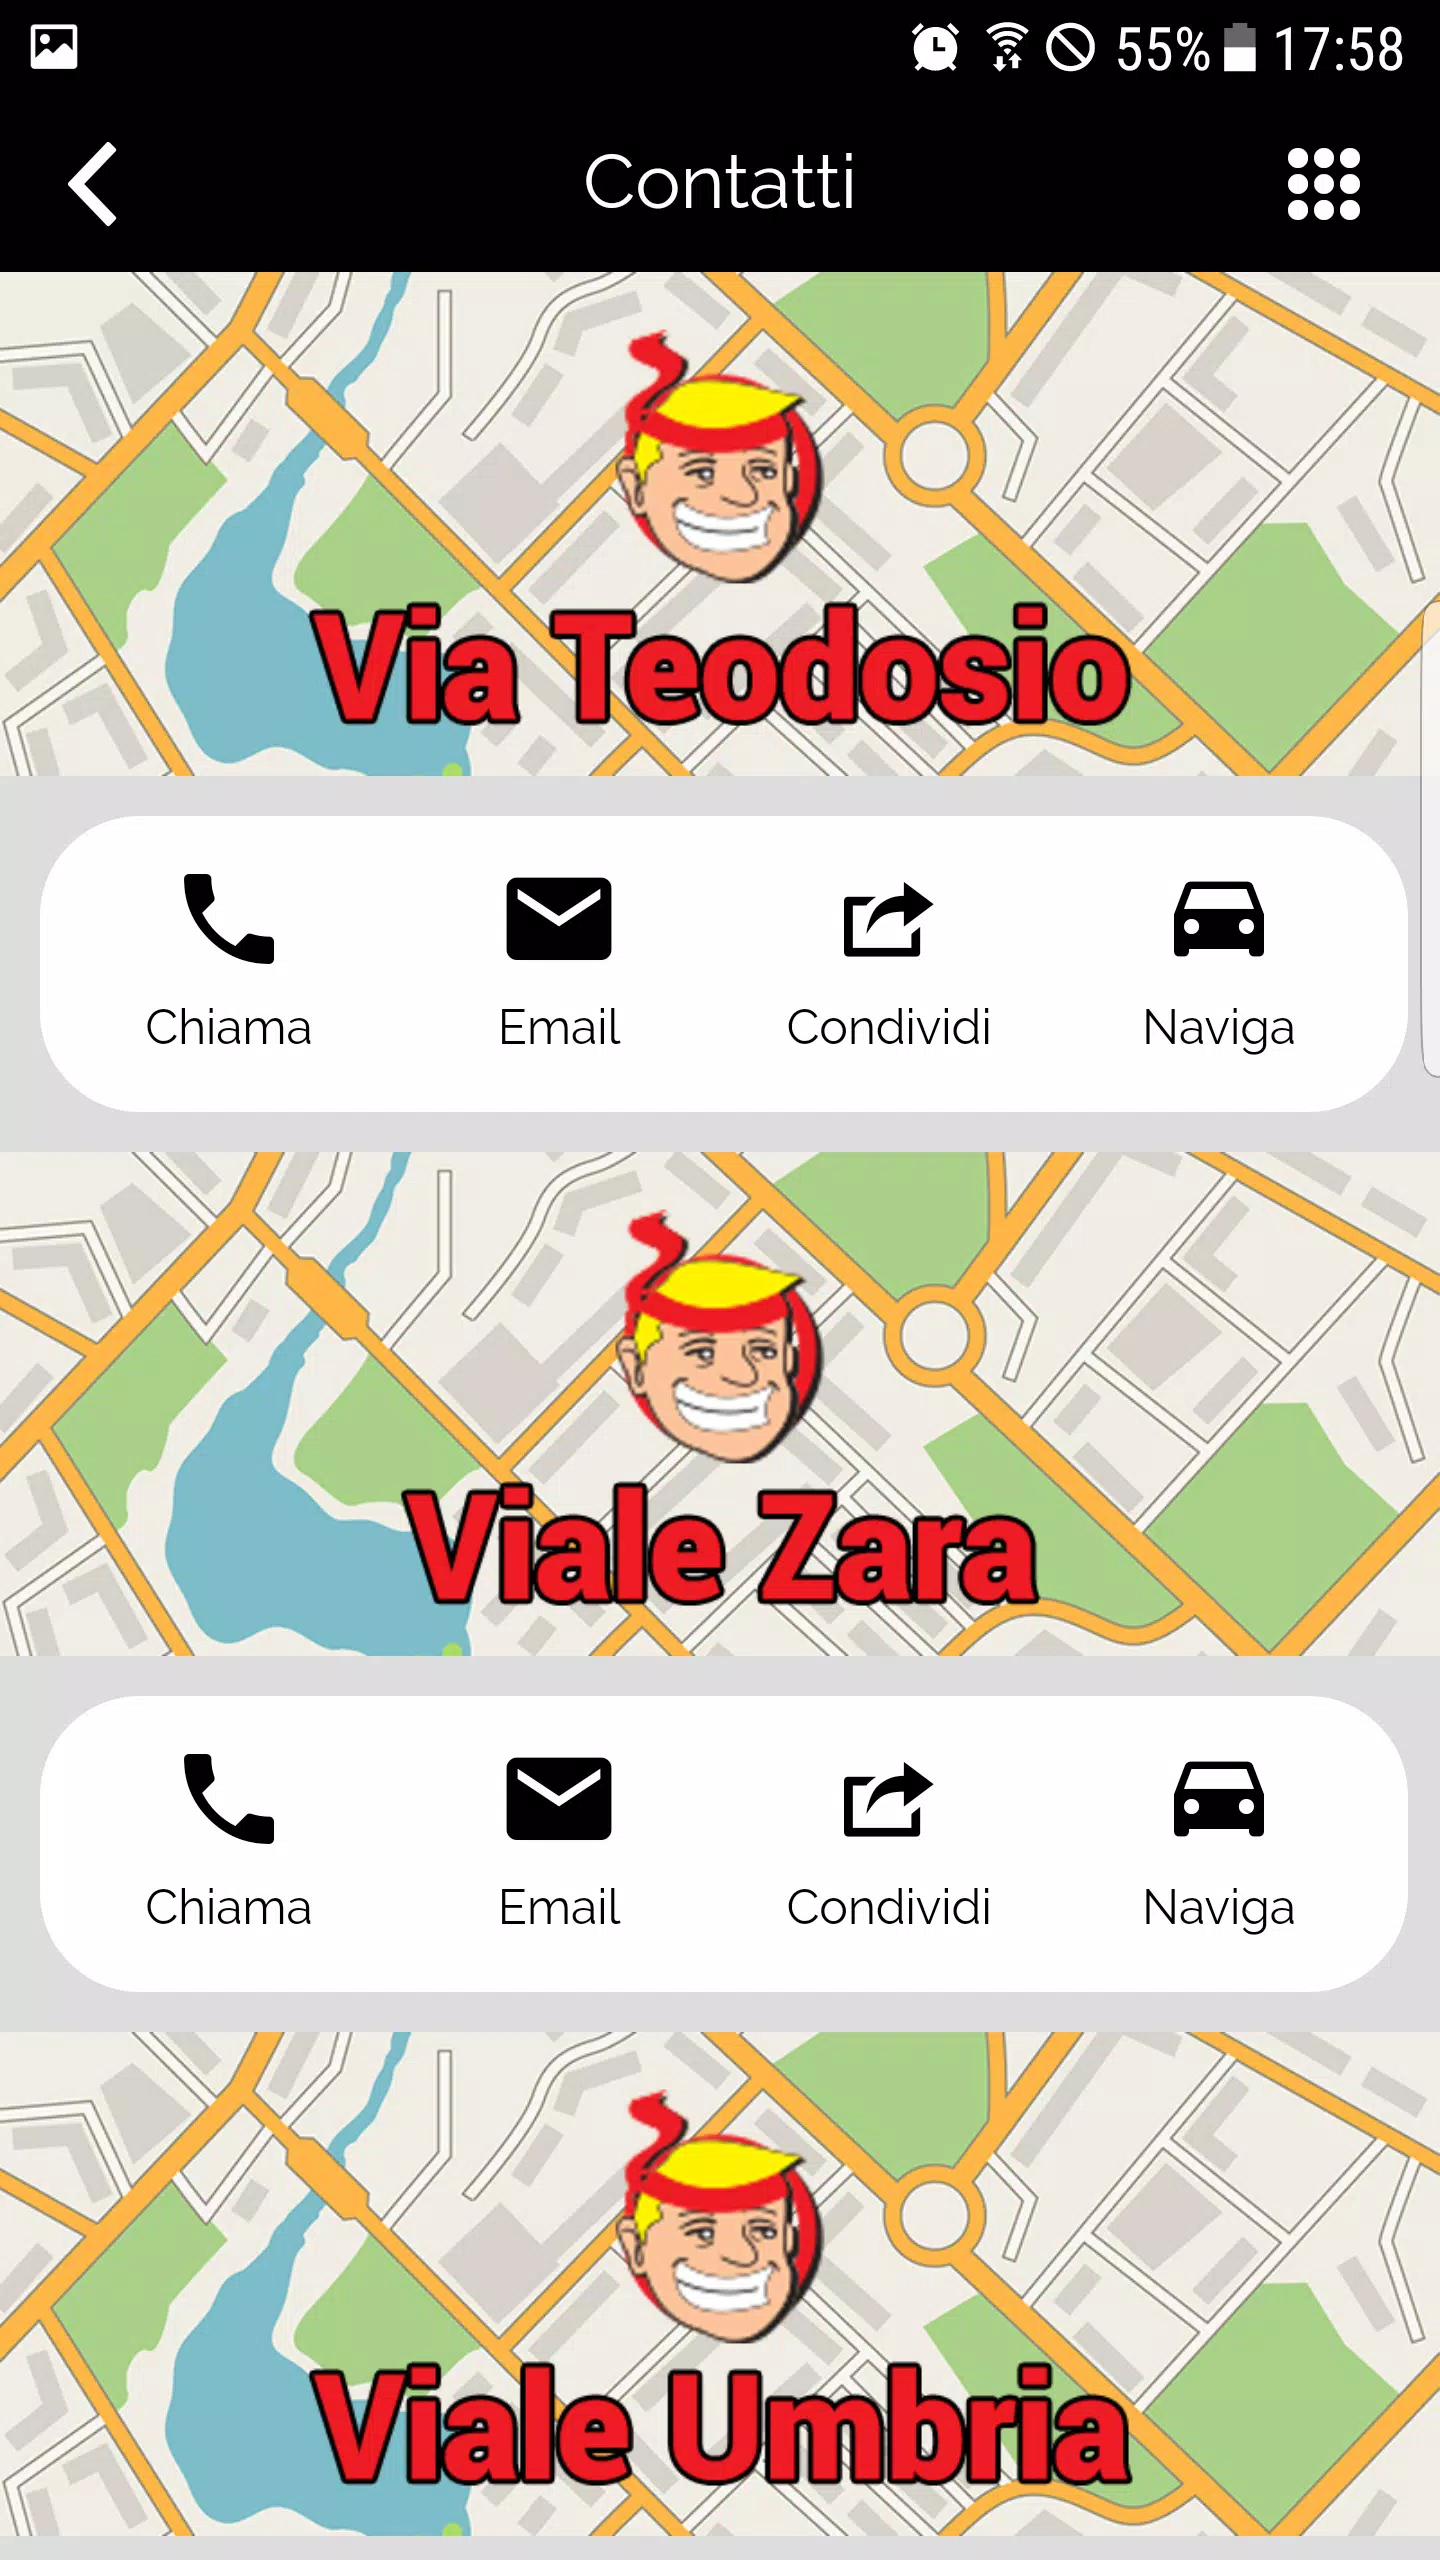 Ciccio Pizza for Android - APK Download